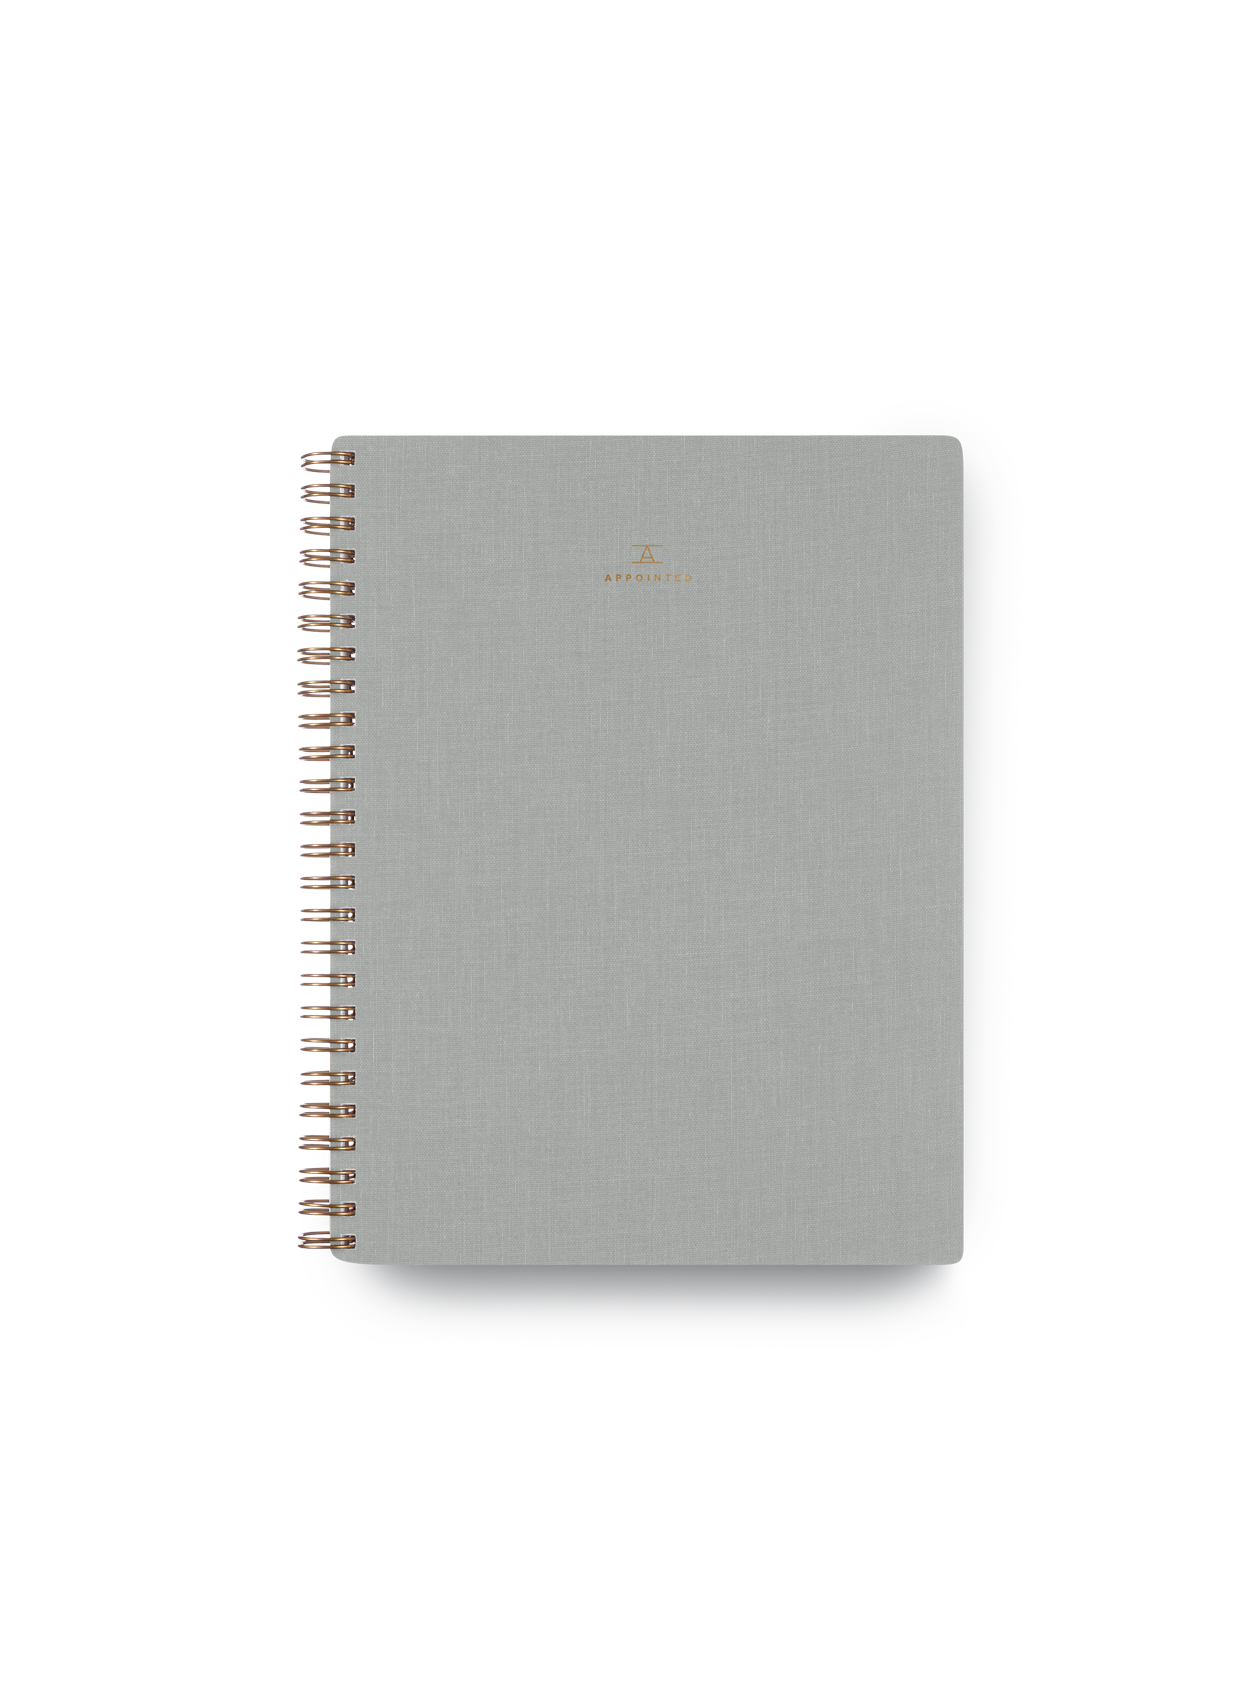 Appointed Dot Grid Workbook in Dove Gray bookcloth with brass wire-o binding front cover || Dove Gray